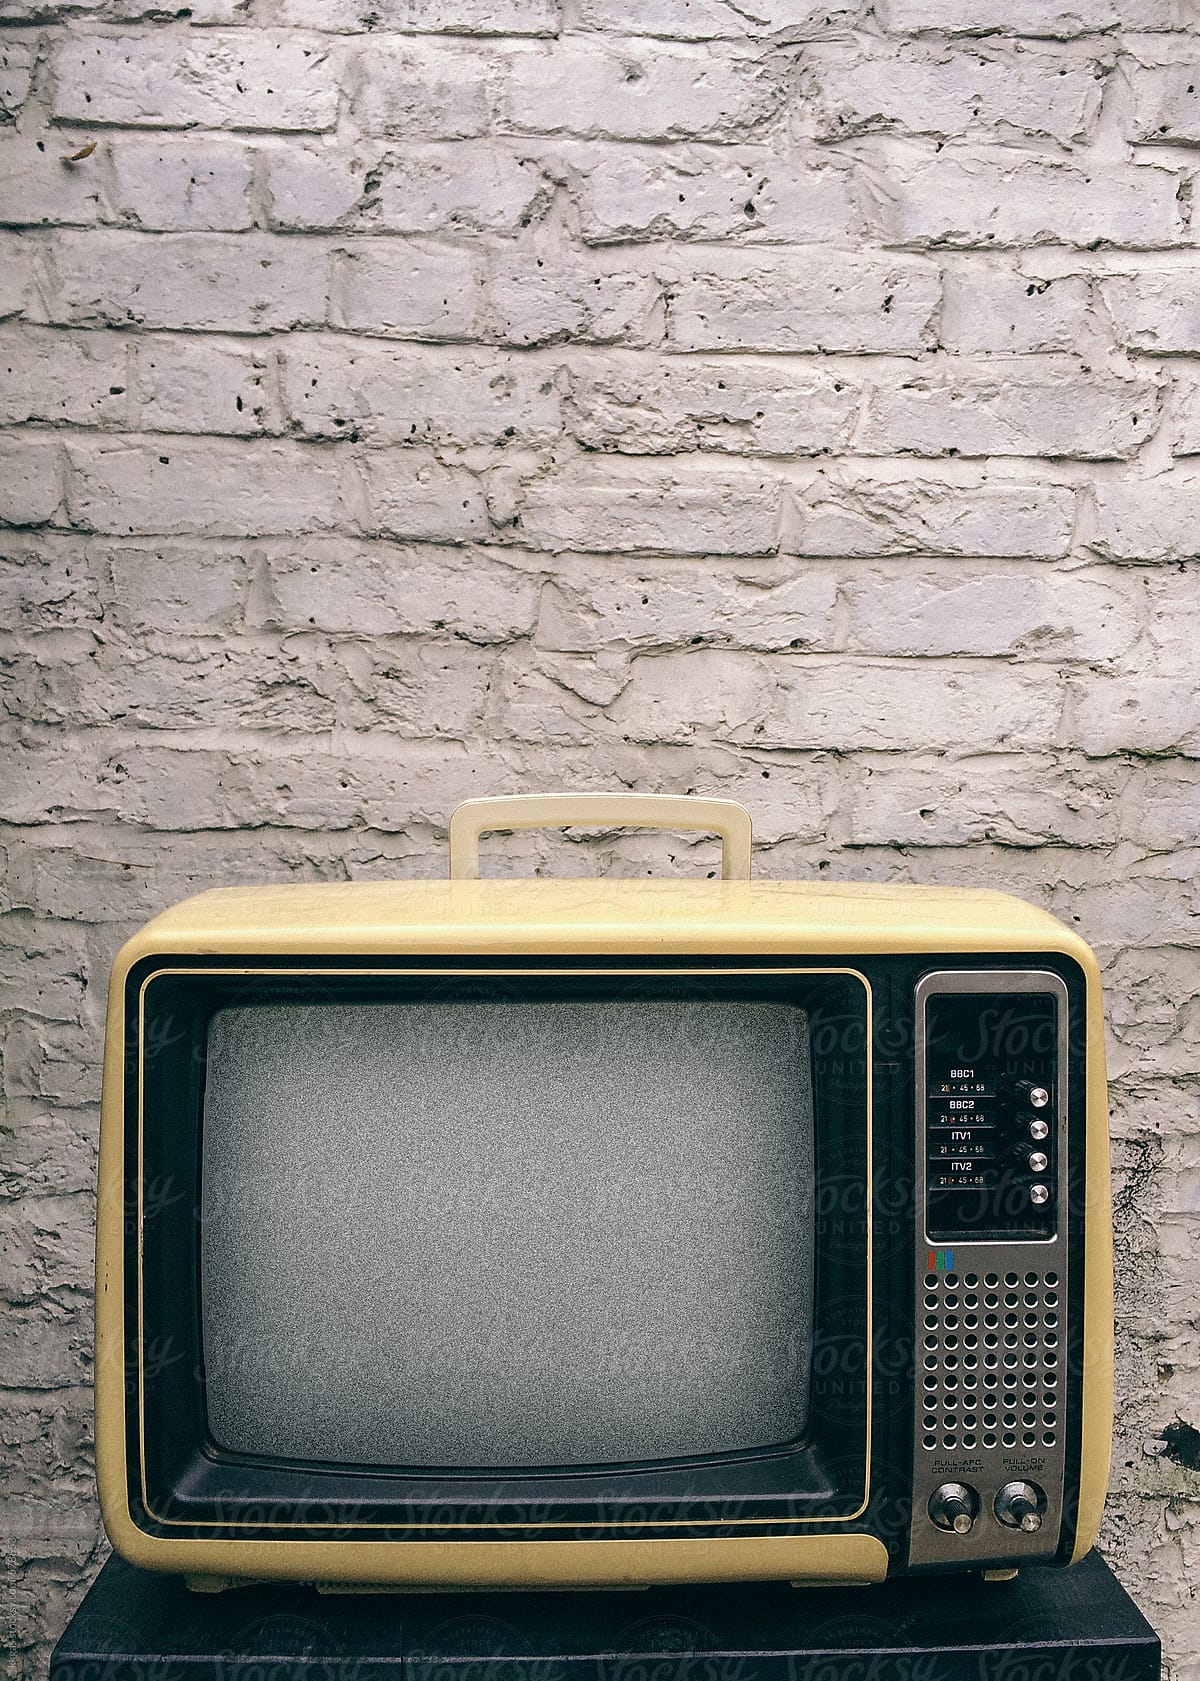 Old Television in front of brick wall